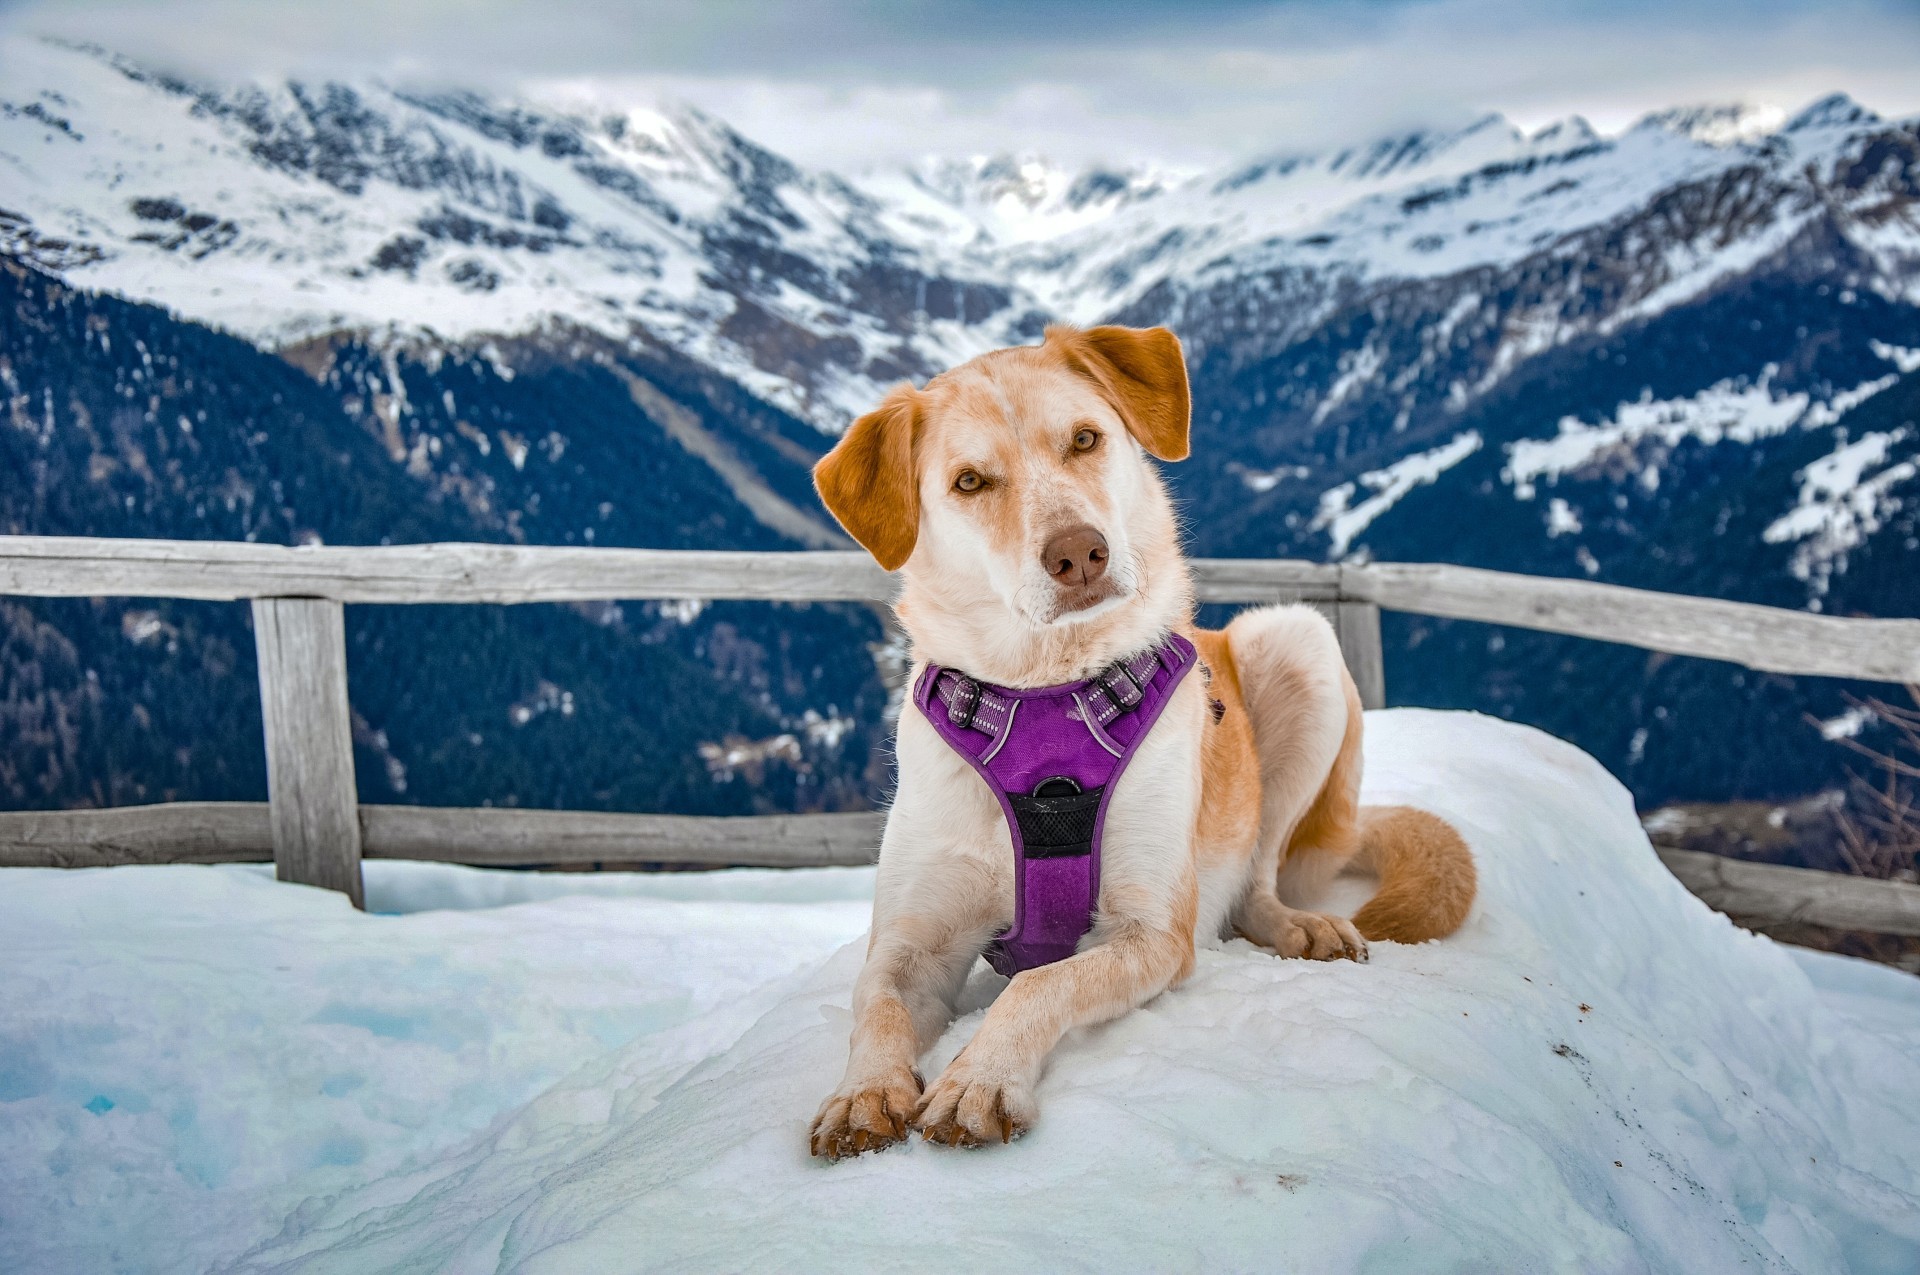 Dog sitting in the snow on a mountain